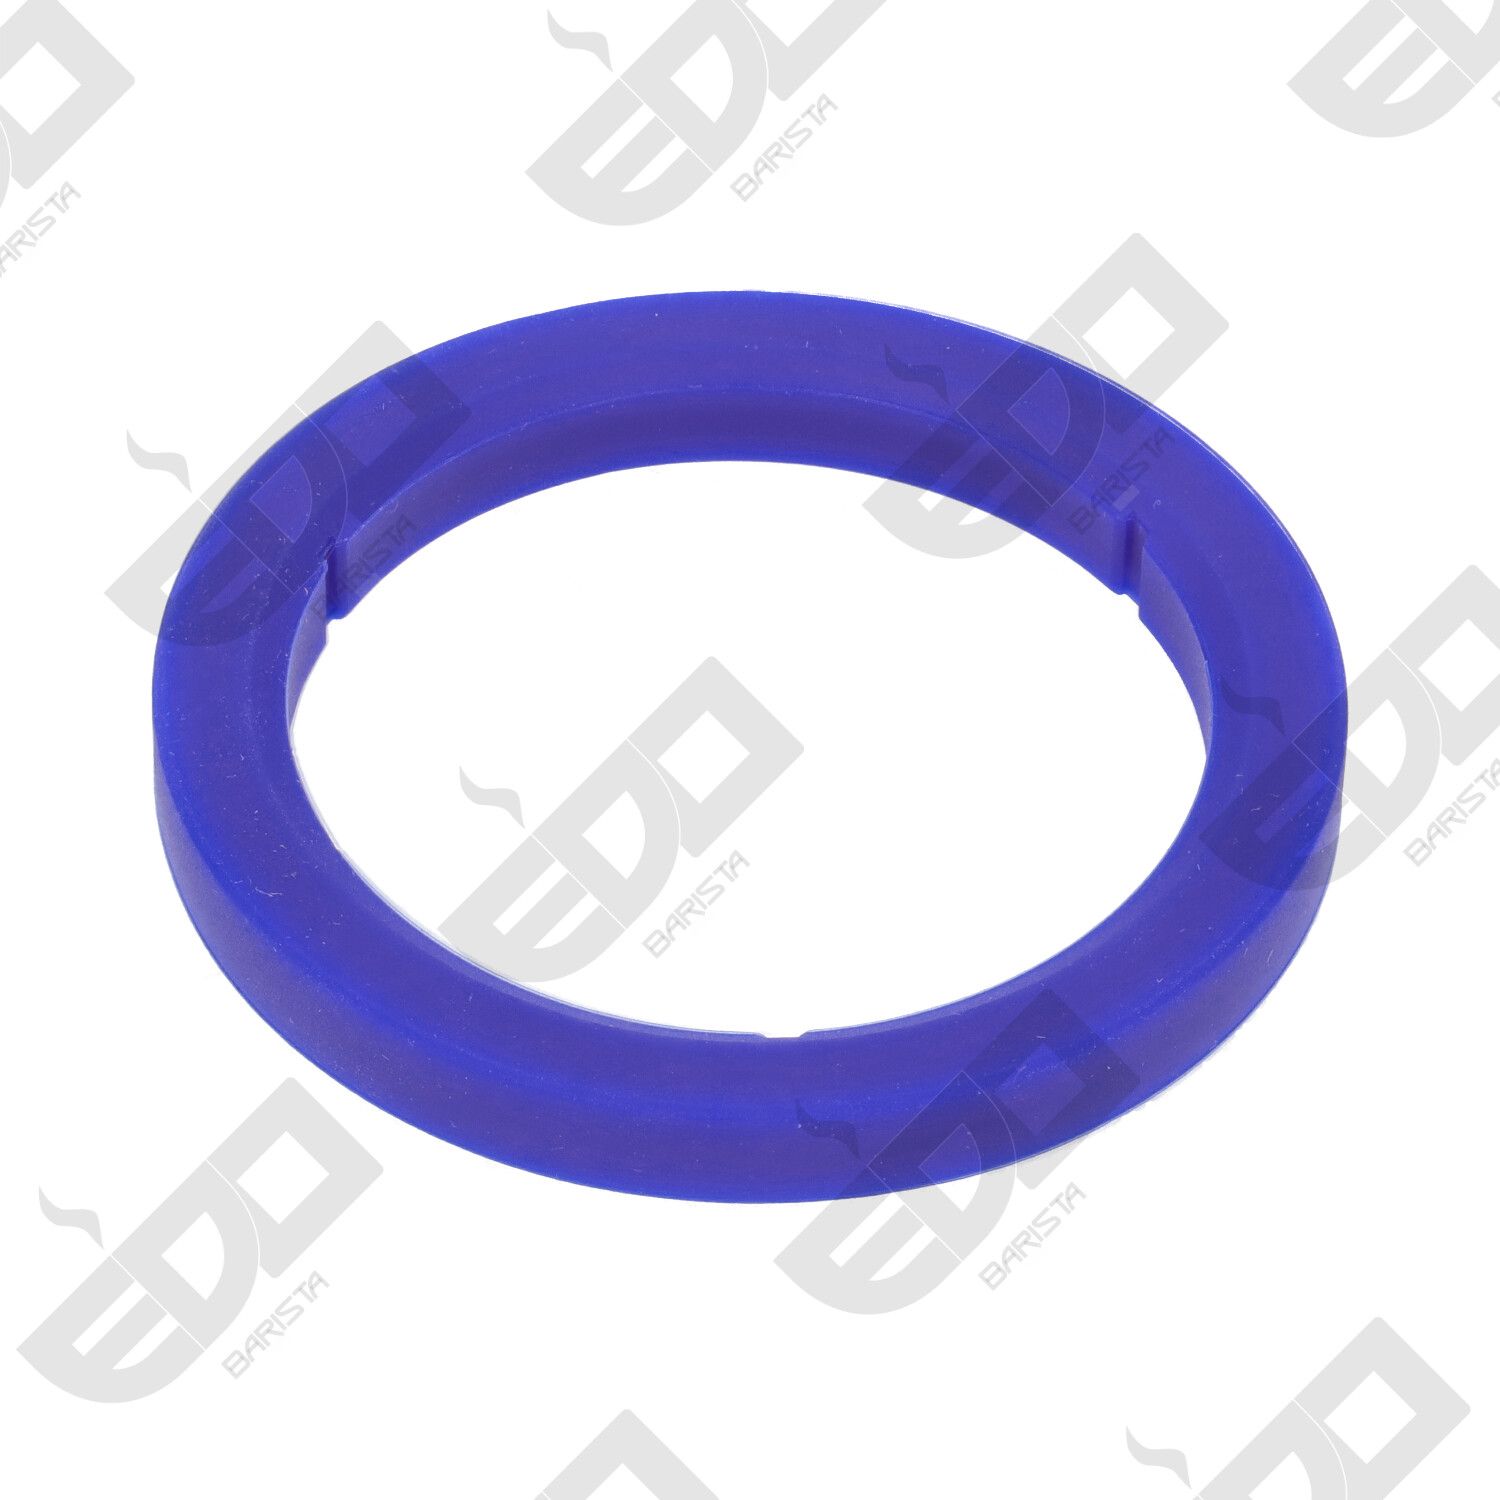 BLUE SILICON GASKET 8mm 